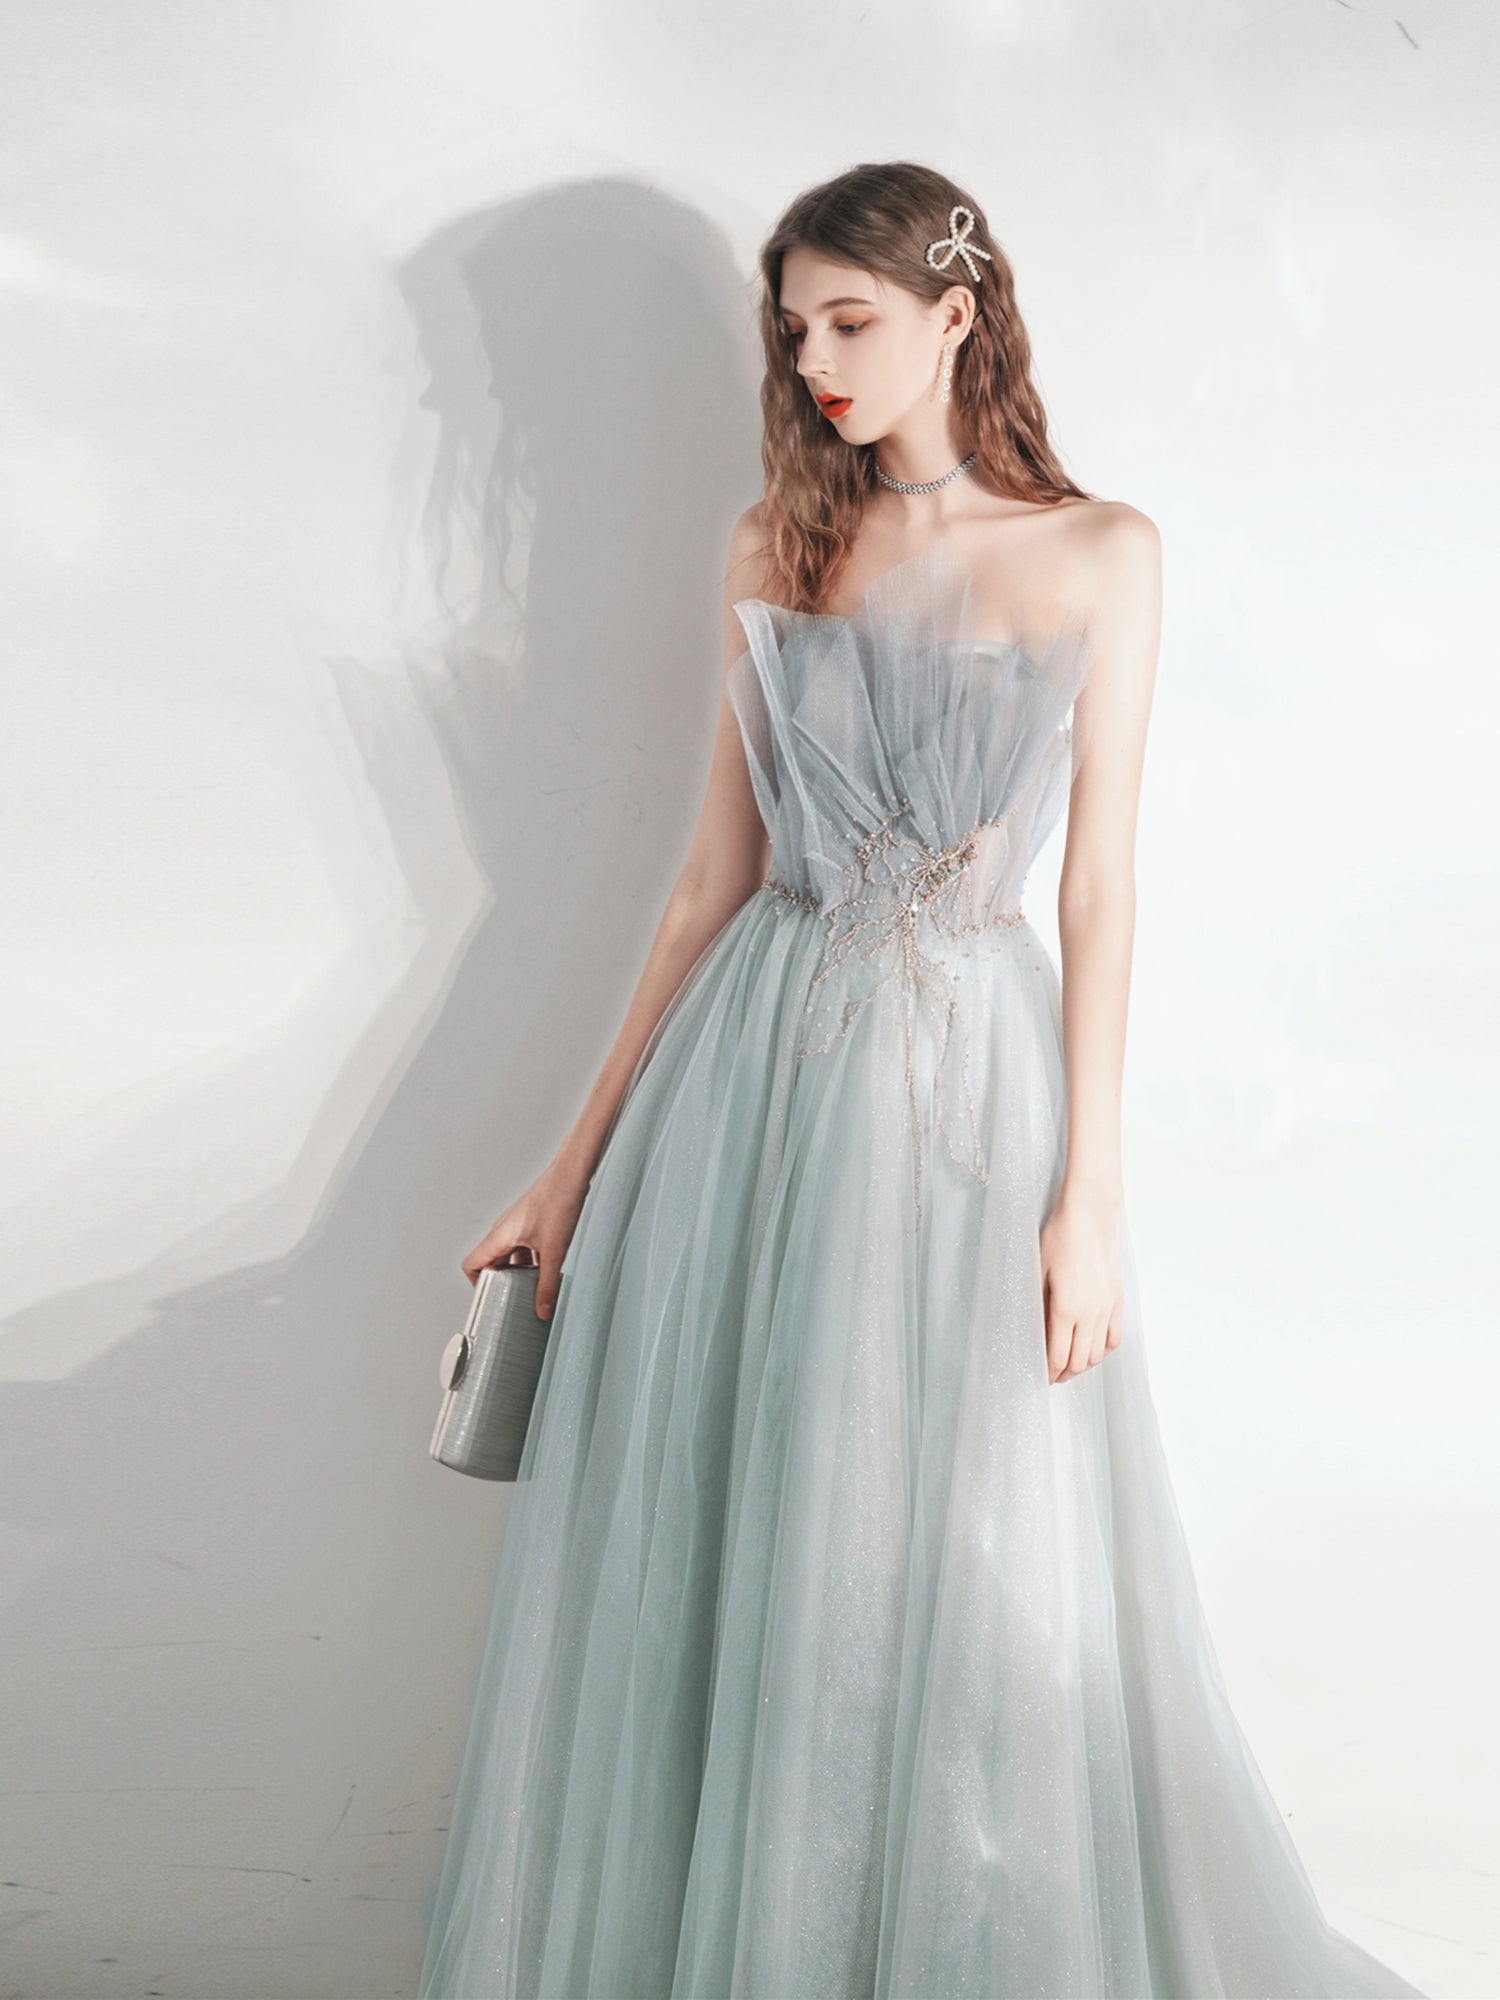 Silver Grey Strapless Occasion Prom Dress Wedding Dress - DollyGown